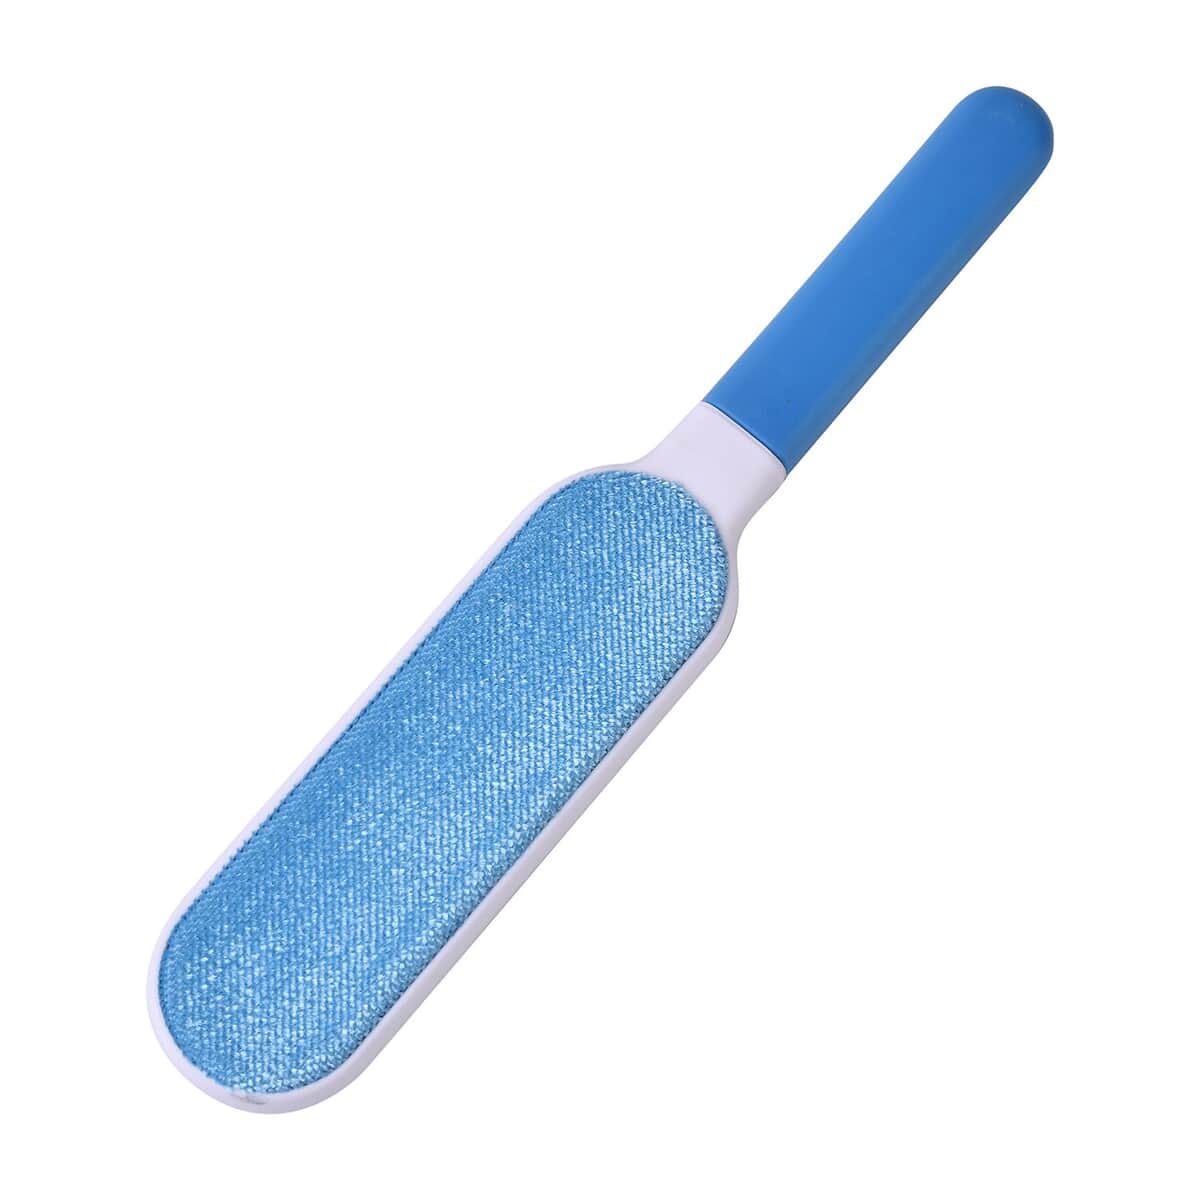 Set of 2 Blue Double Sided Cleaning Brush (3.54"x1.57"x12.6") & (2.16"x0.98"x5.51") image number 3